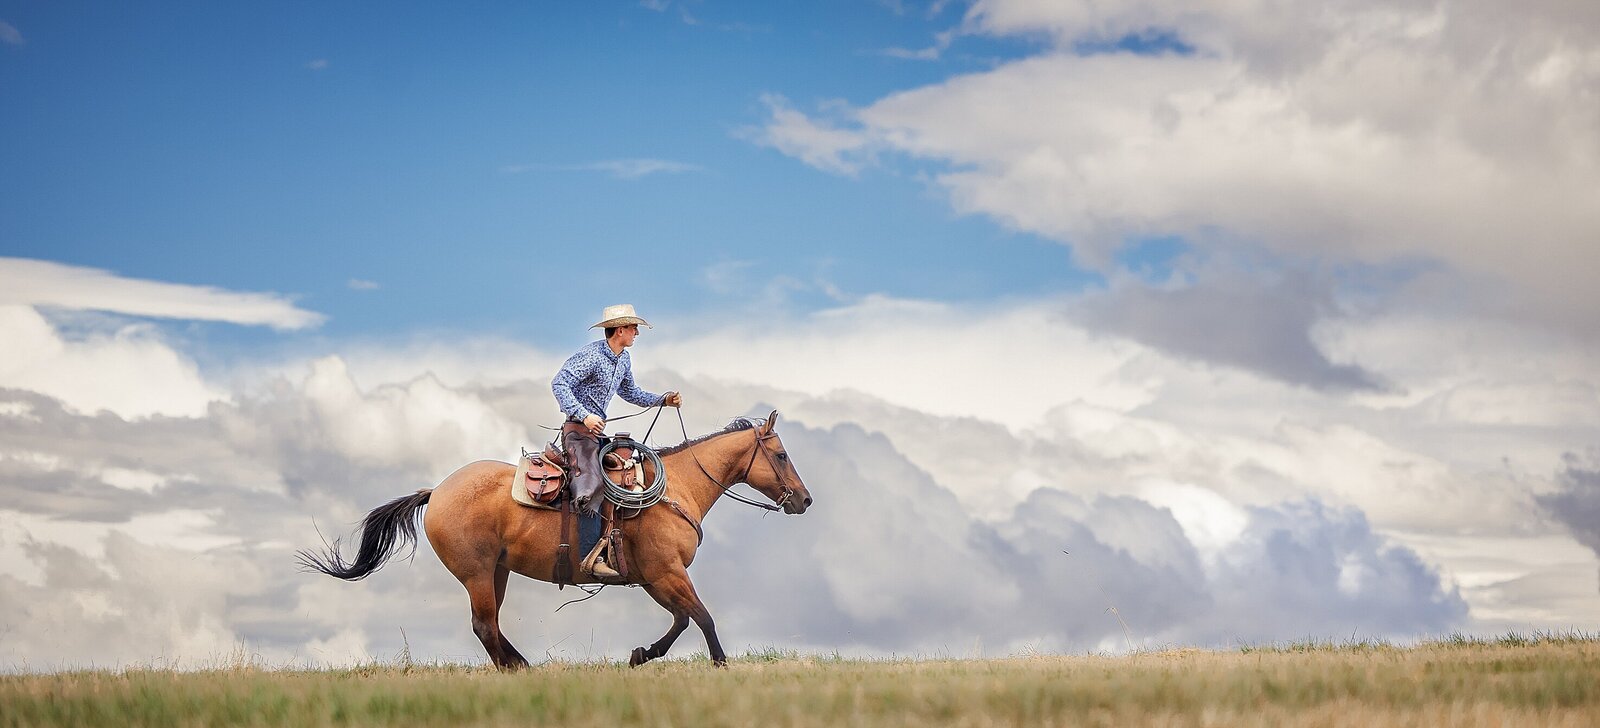 Senior boy  in cowboy gear galloping on a horse with a blue sky and clouds in the background